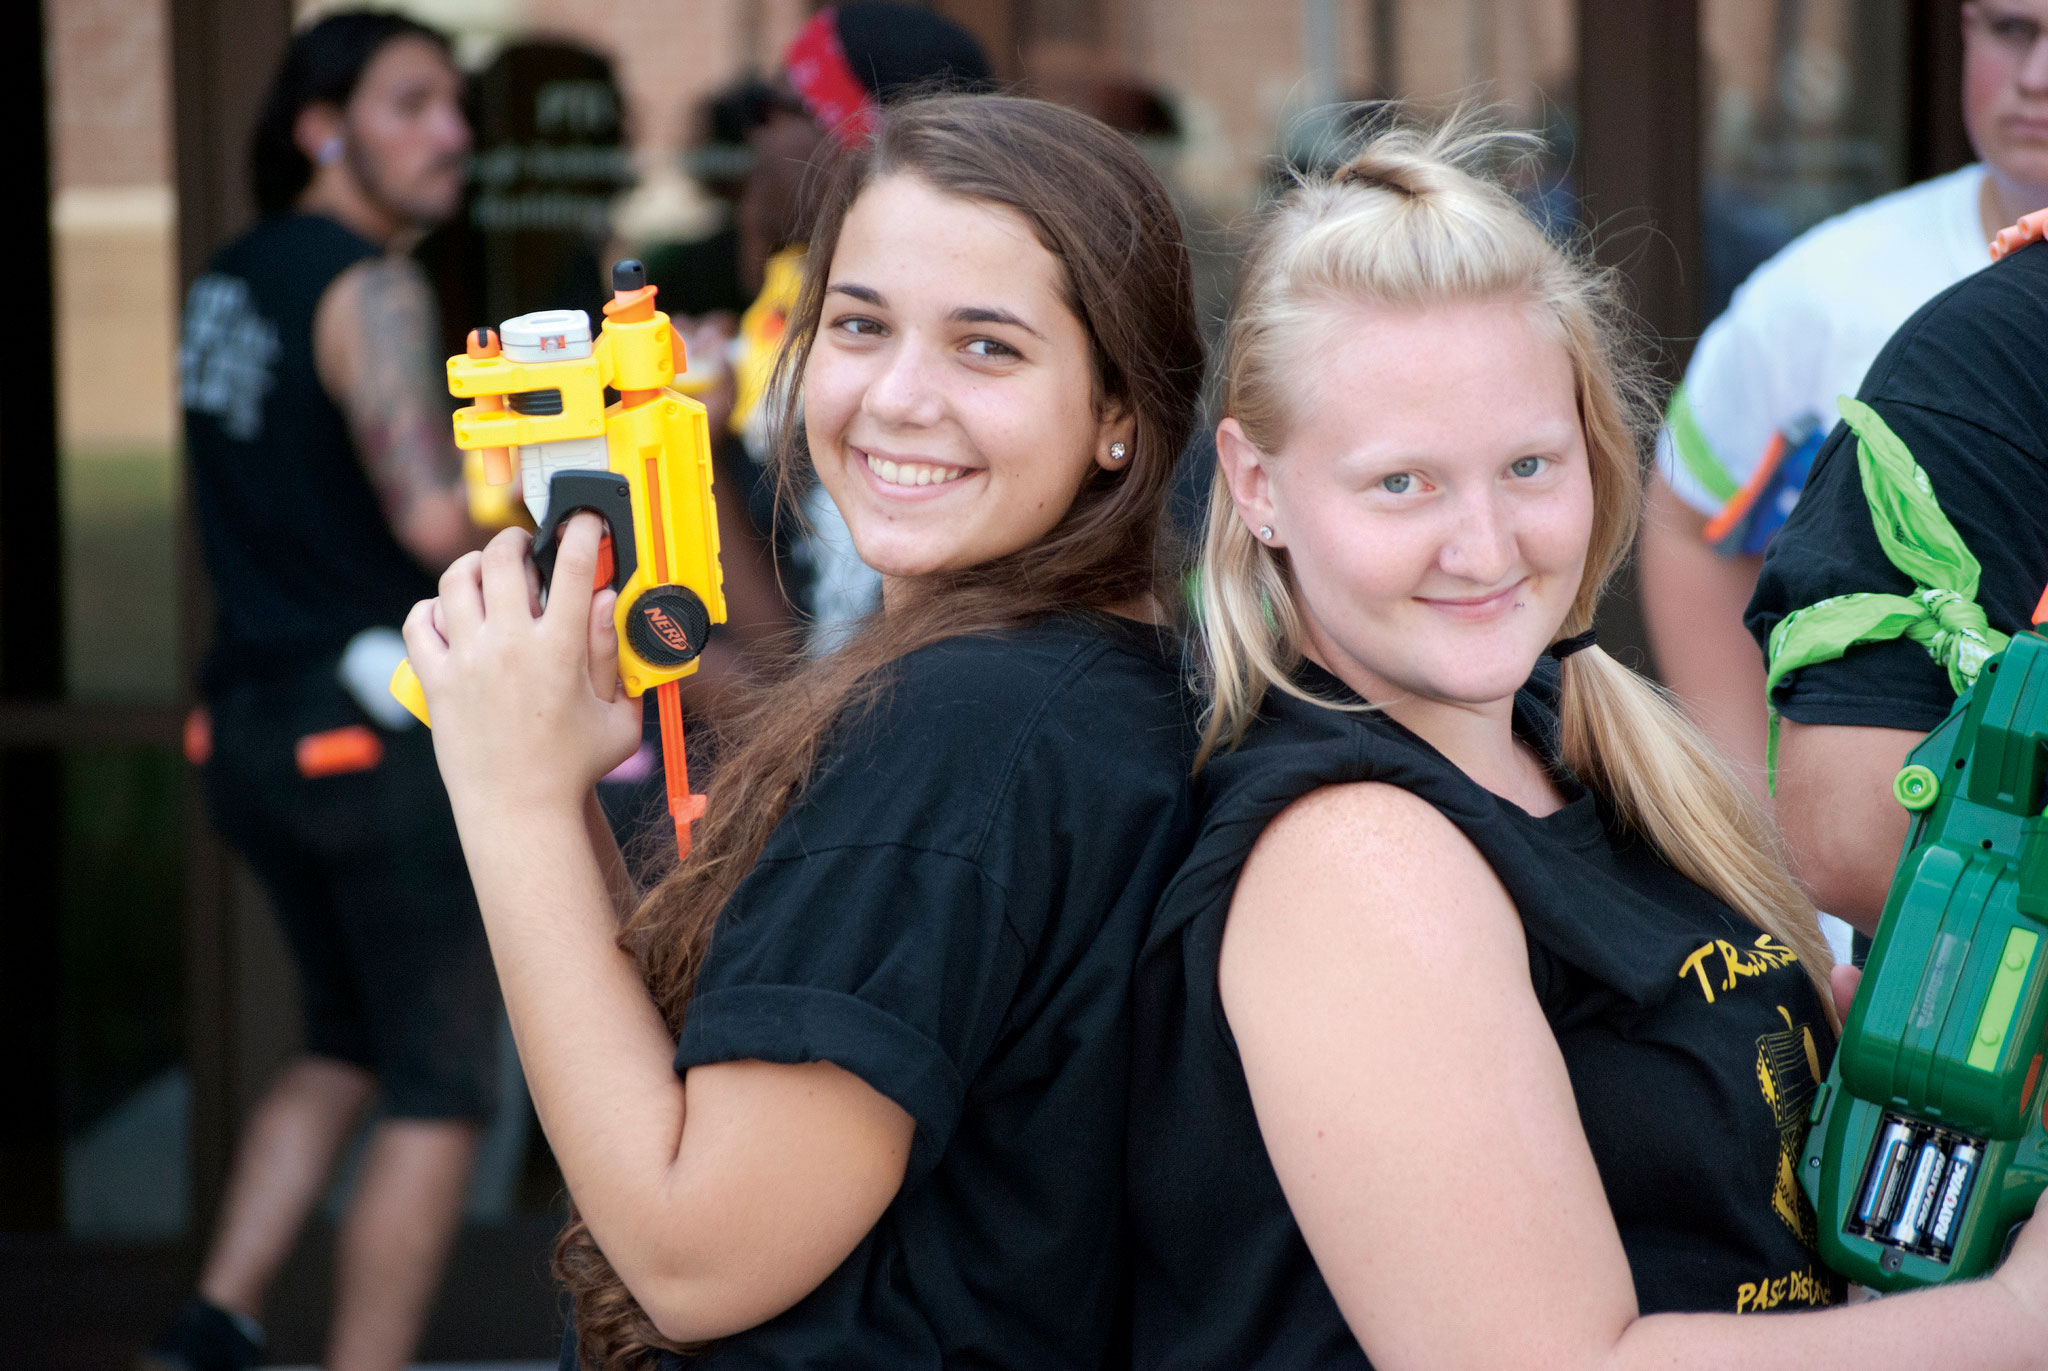 students standing back to back with Nerf guns